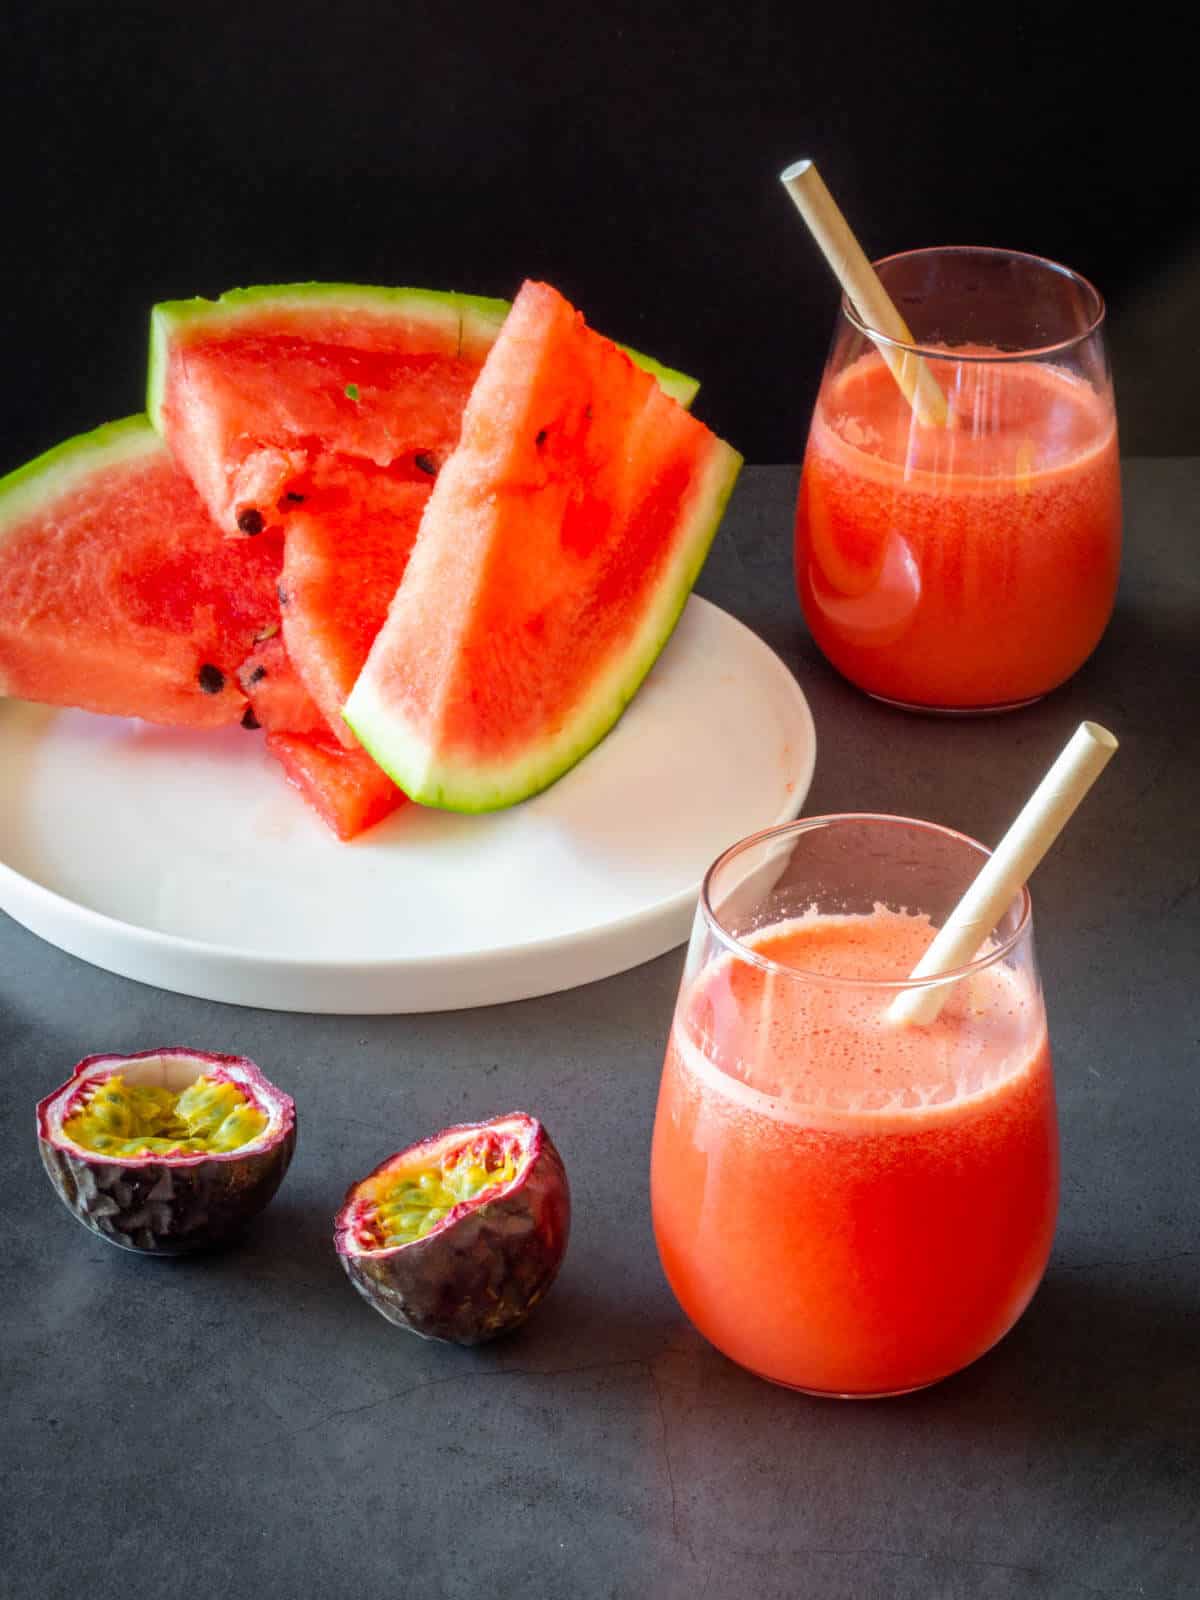 Passion Fruit and Watermelon Juice glass